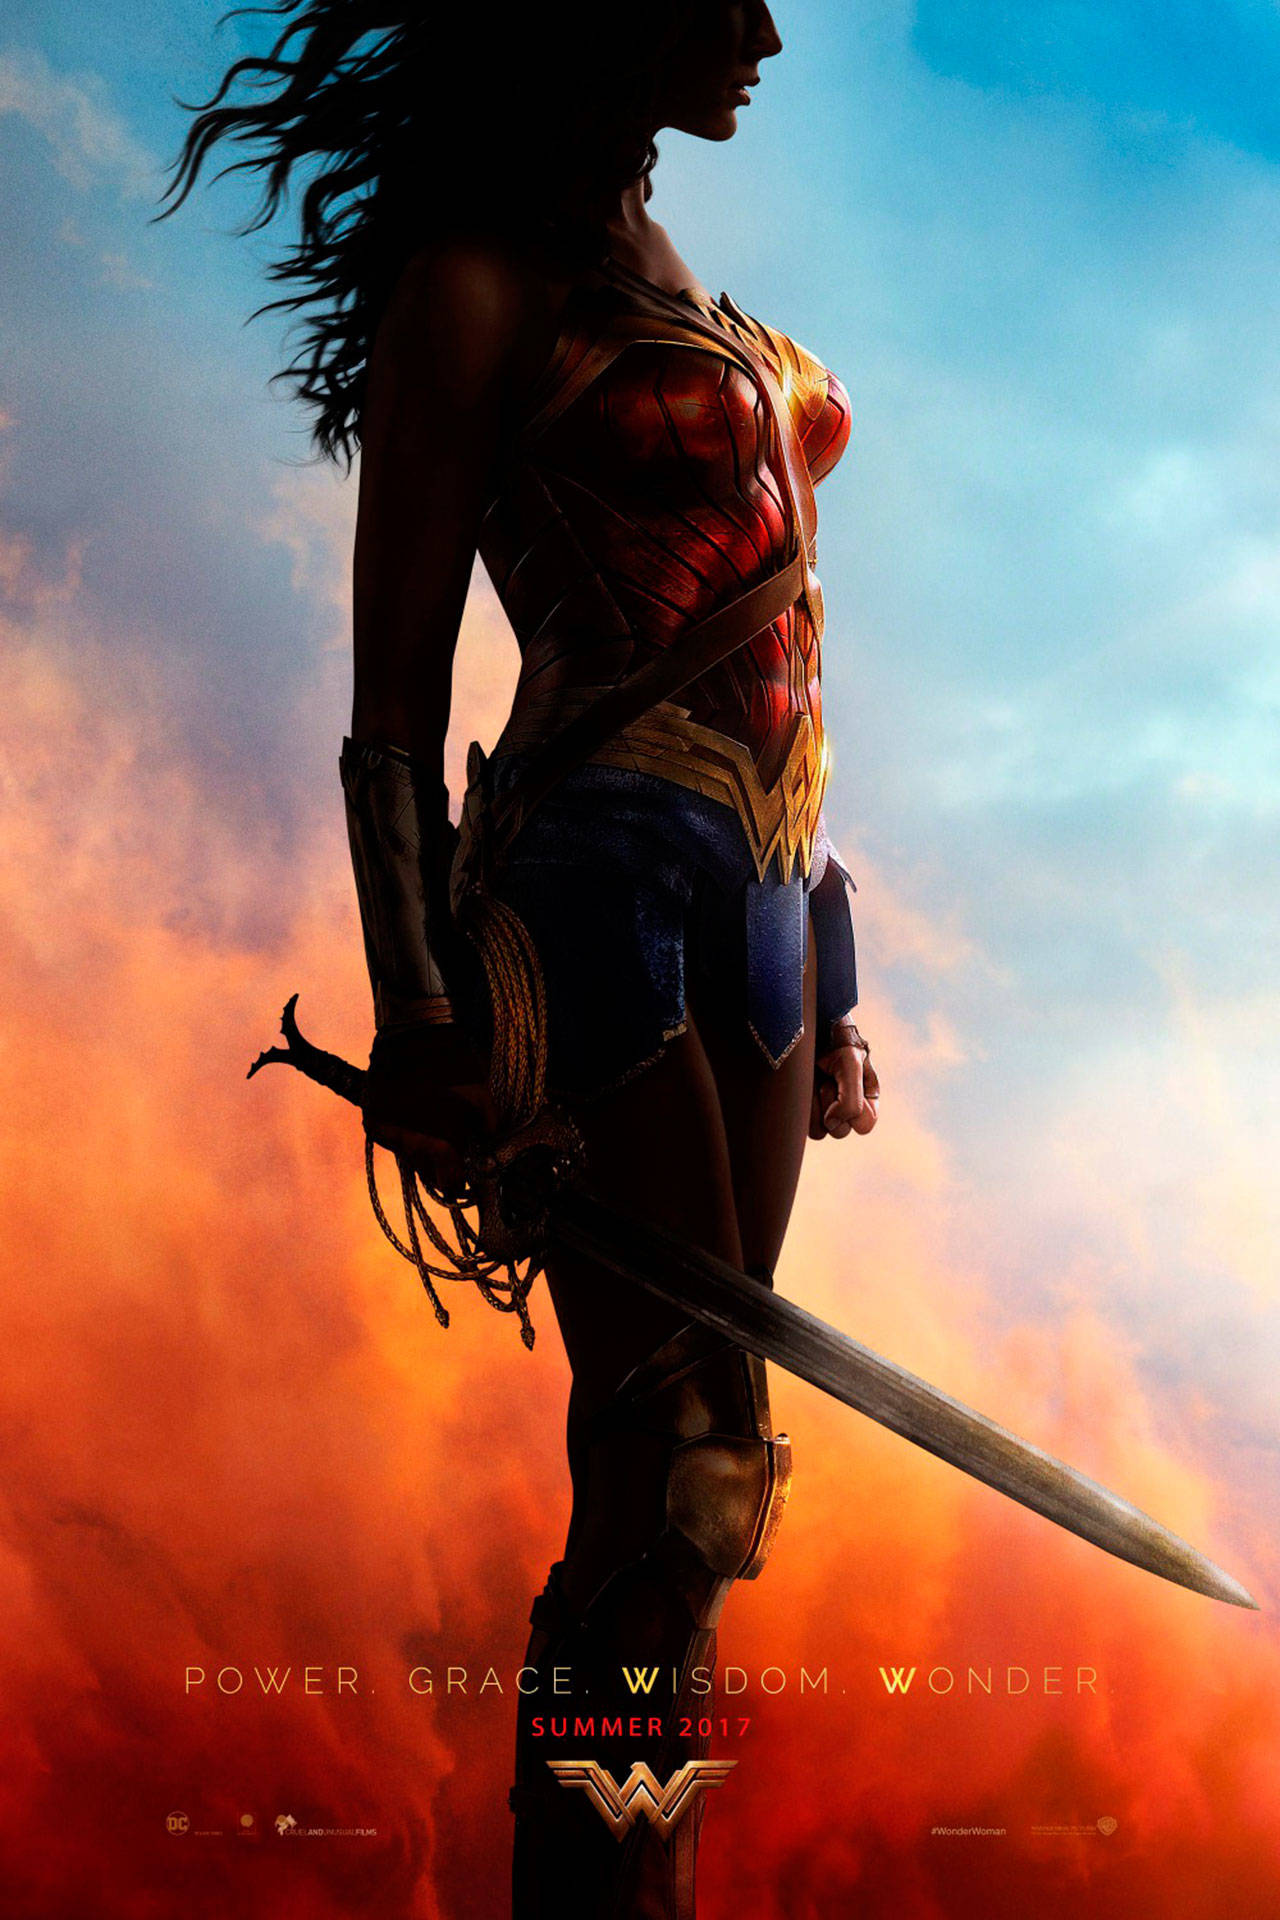 Image courtesy of Warner Bros. Pictures | Warner Bros. Pictures’ “Wonder Woman” will get an early premiere at Bainbridge Cinemas on Thursday, June 1.